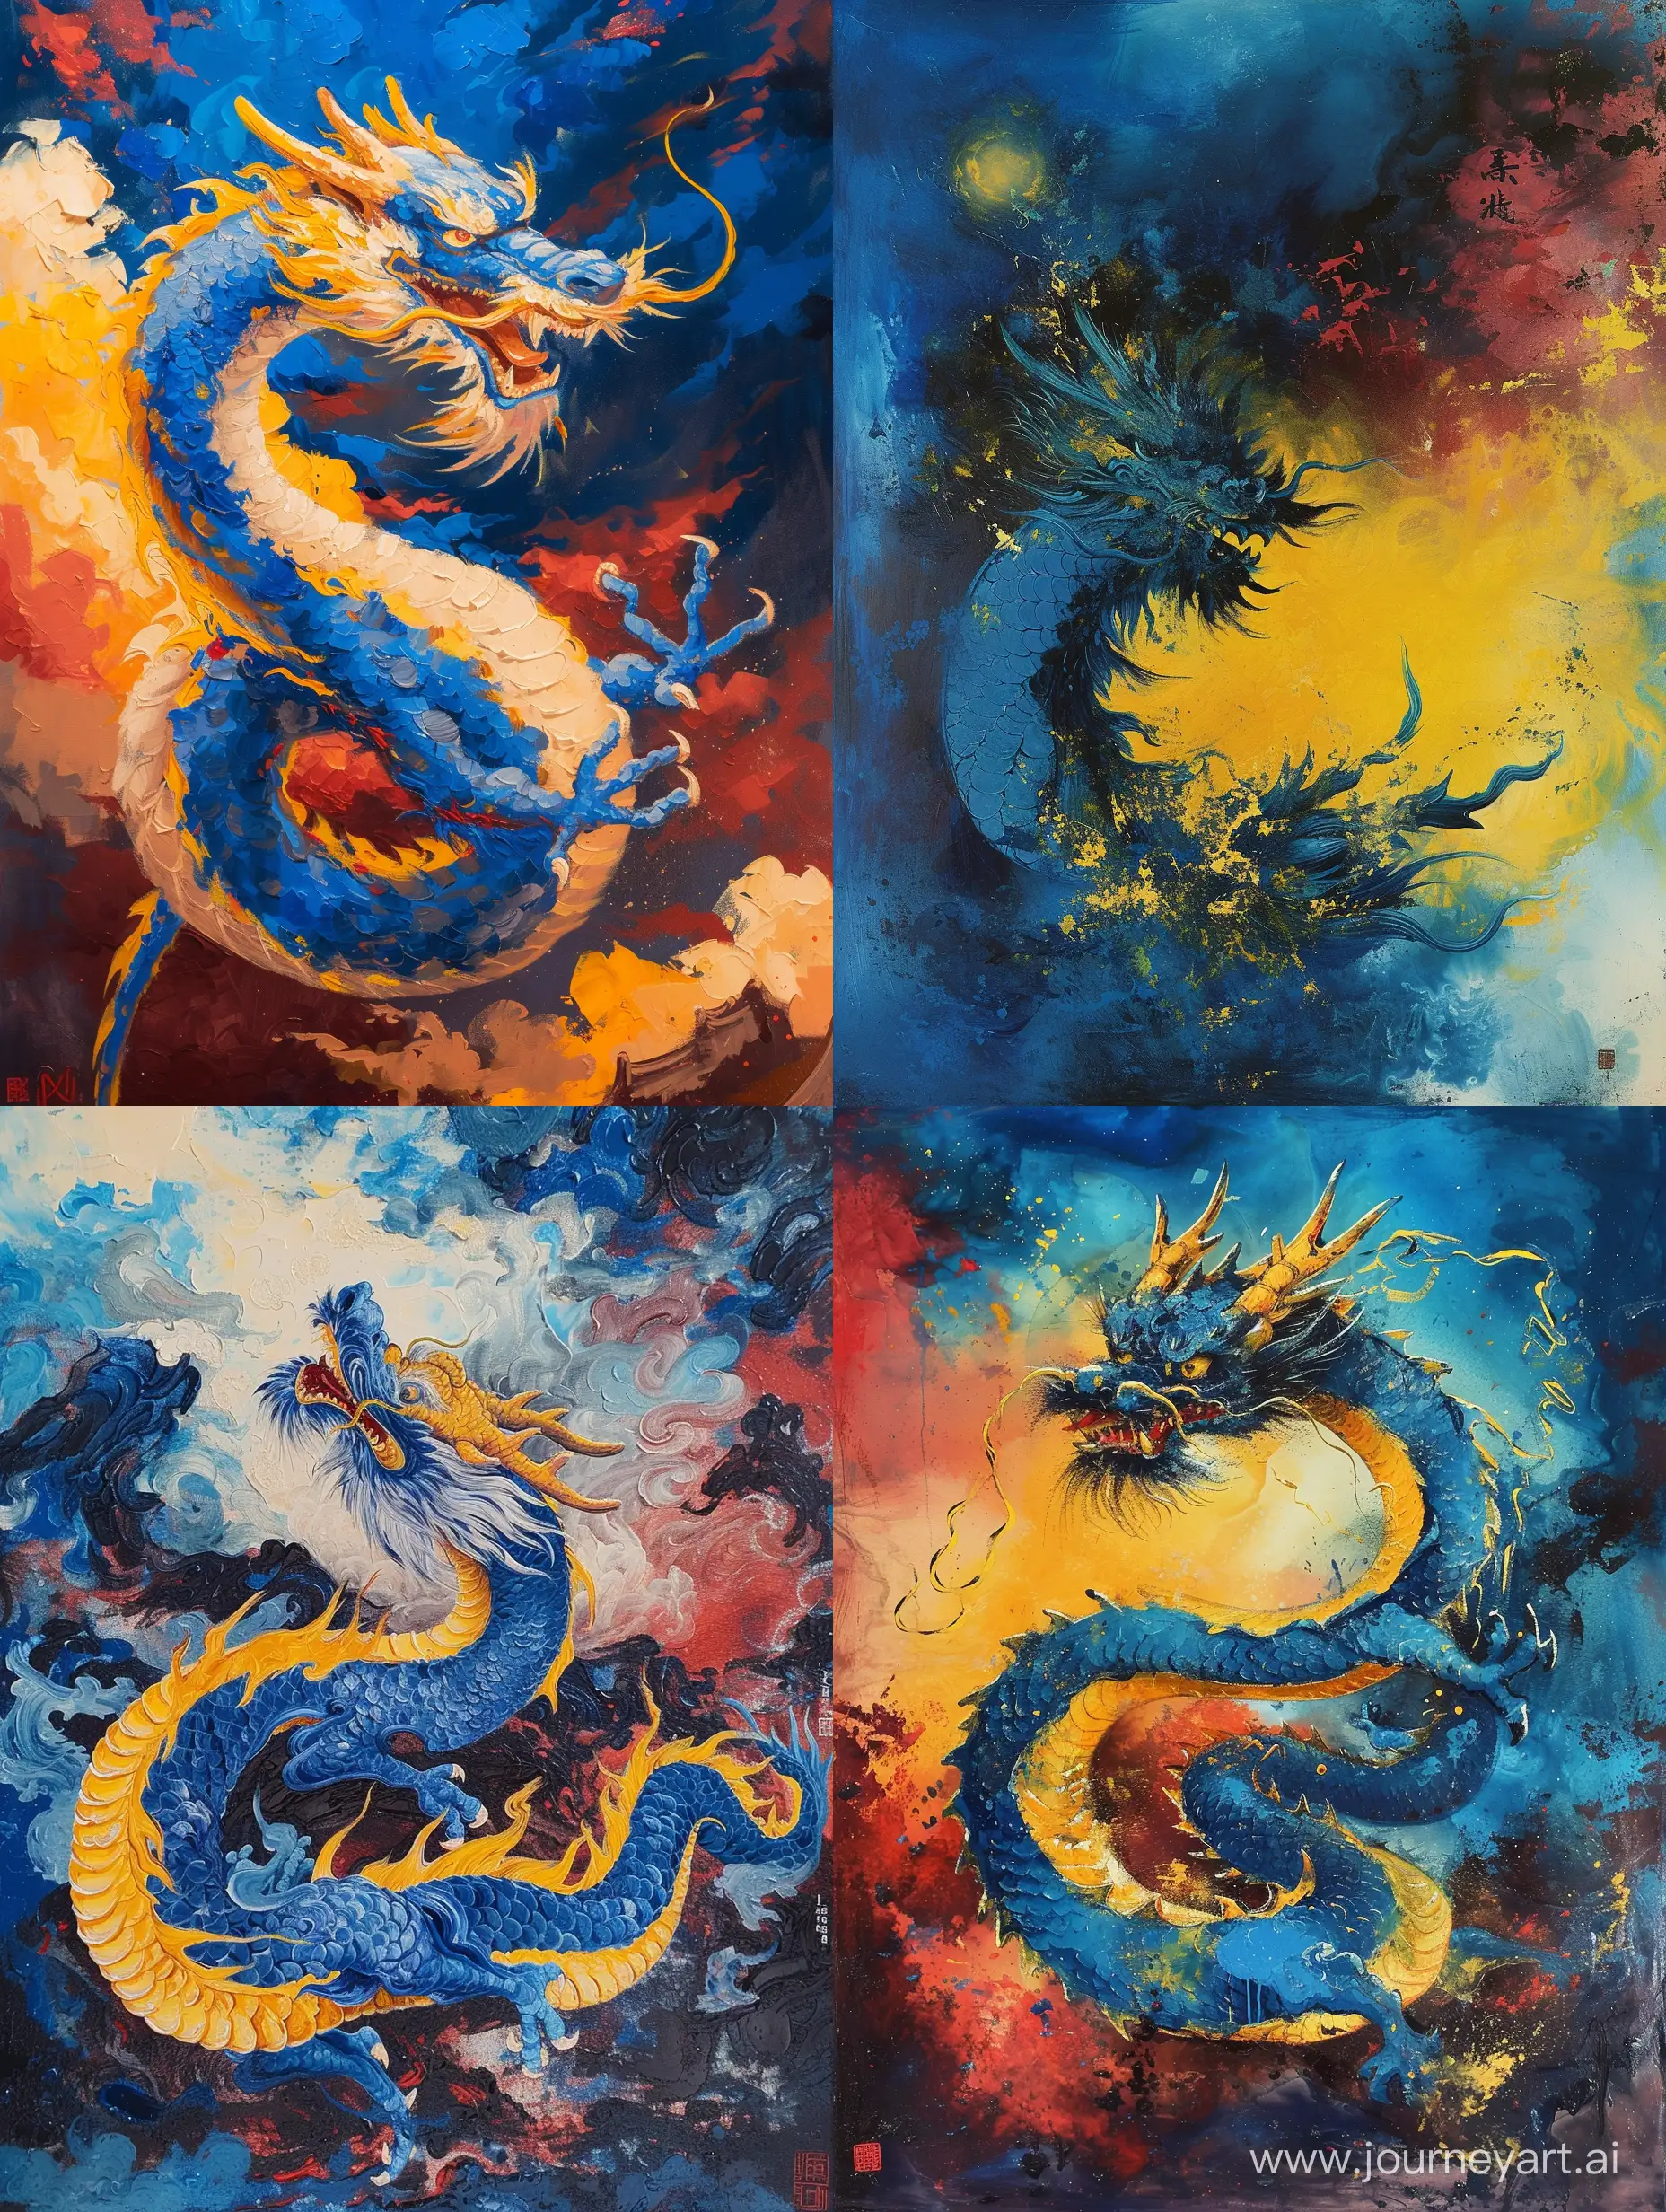 Expressive-Chinese-Dragon-Painting-with-Blue-and-Yellow-Colors